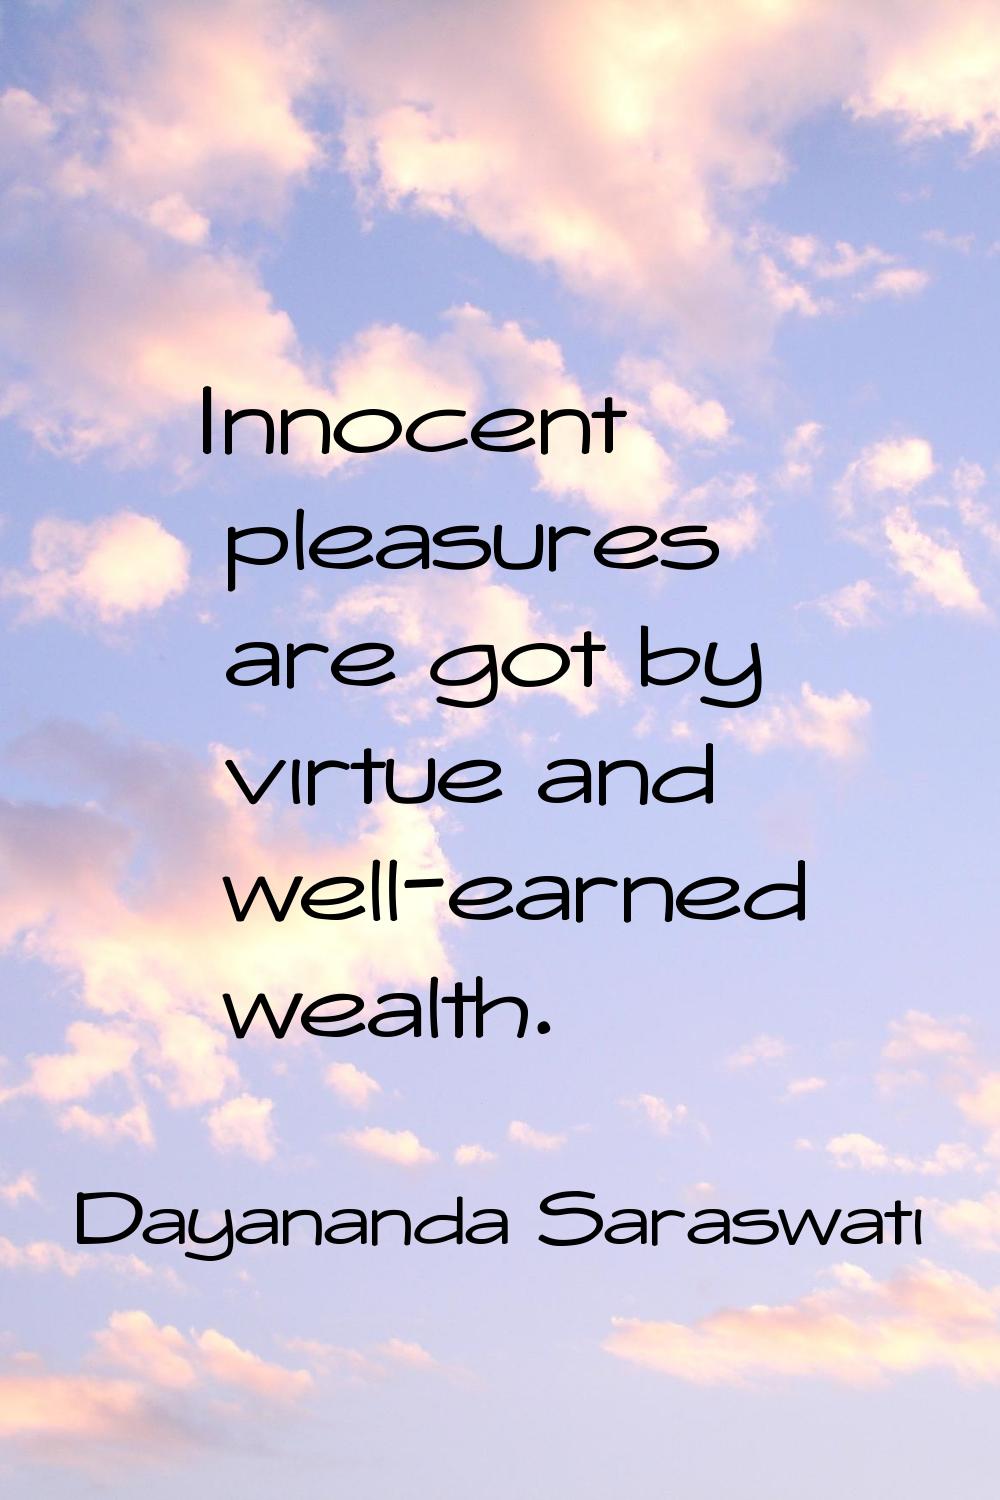 Innocent pleasures are got by virtue and well-earned wealth.